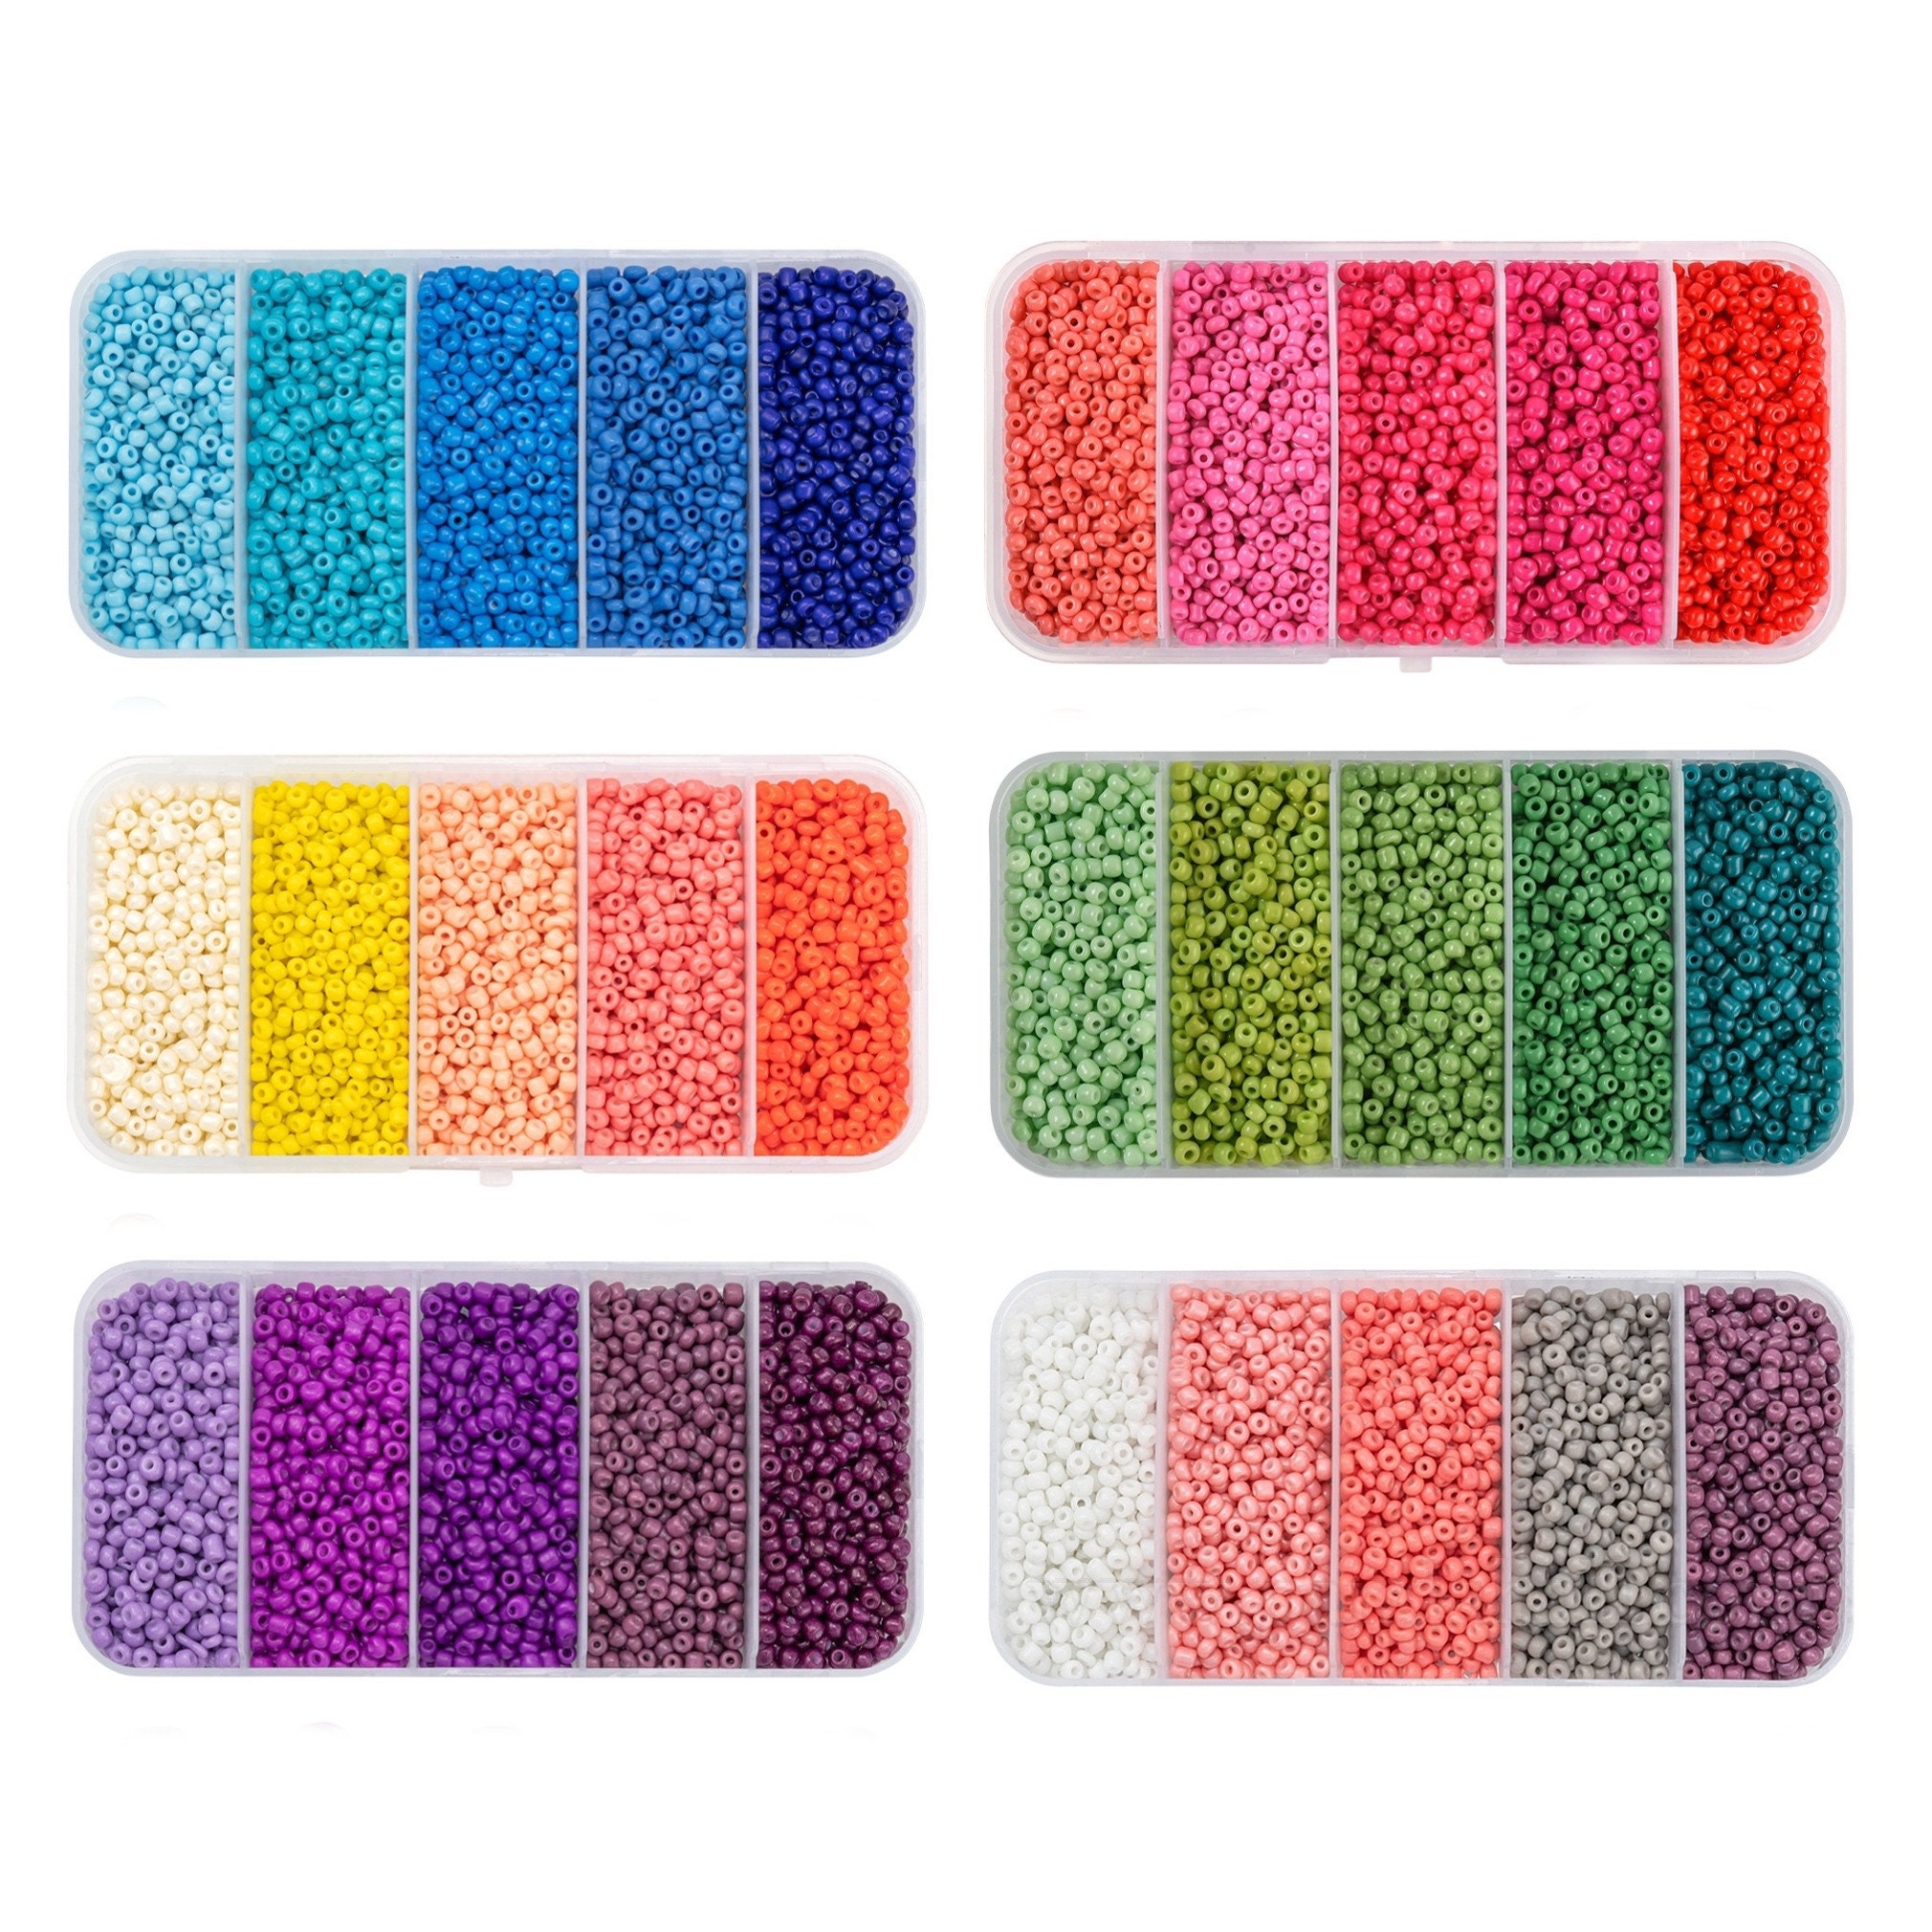 BALABEAD 3mm Round Size Almost Uniform Glass Seed Beads with Beading Kit, About